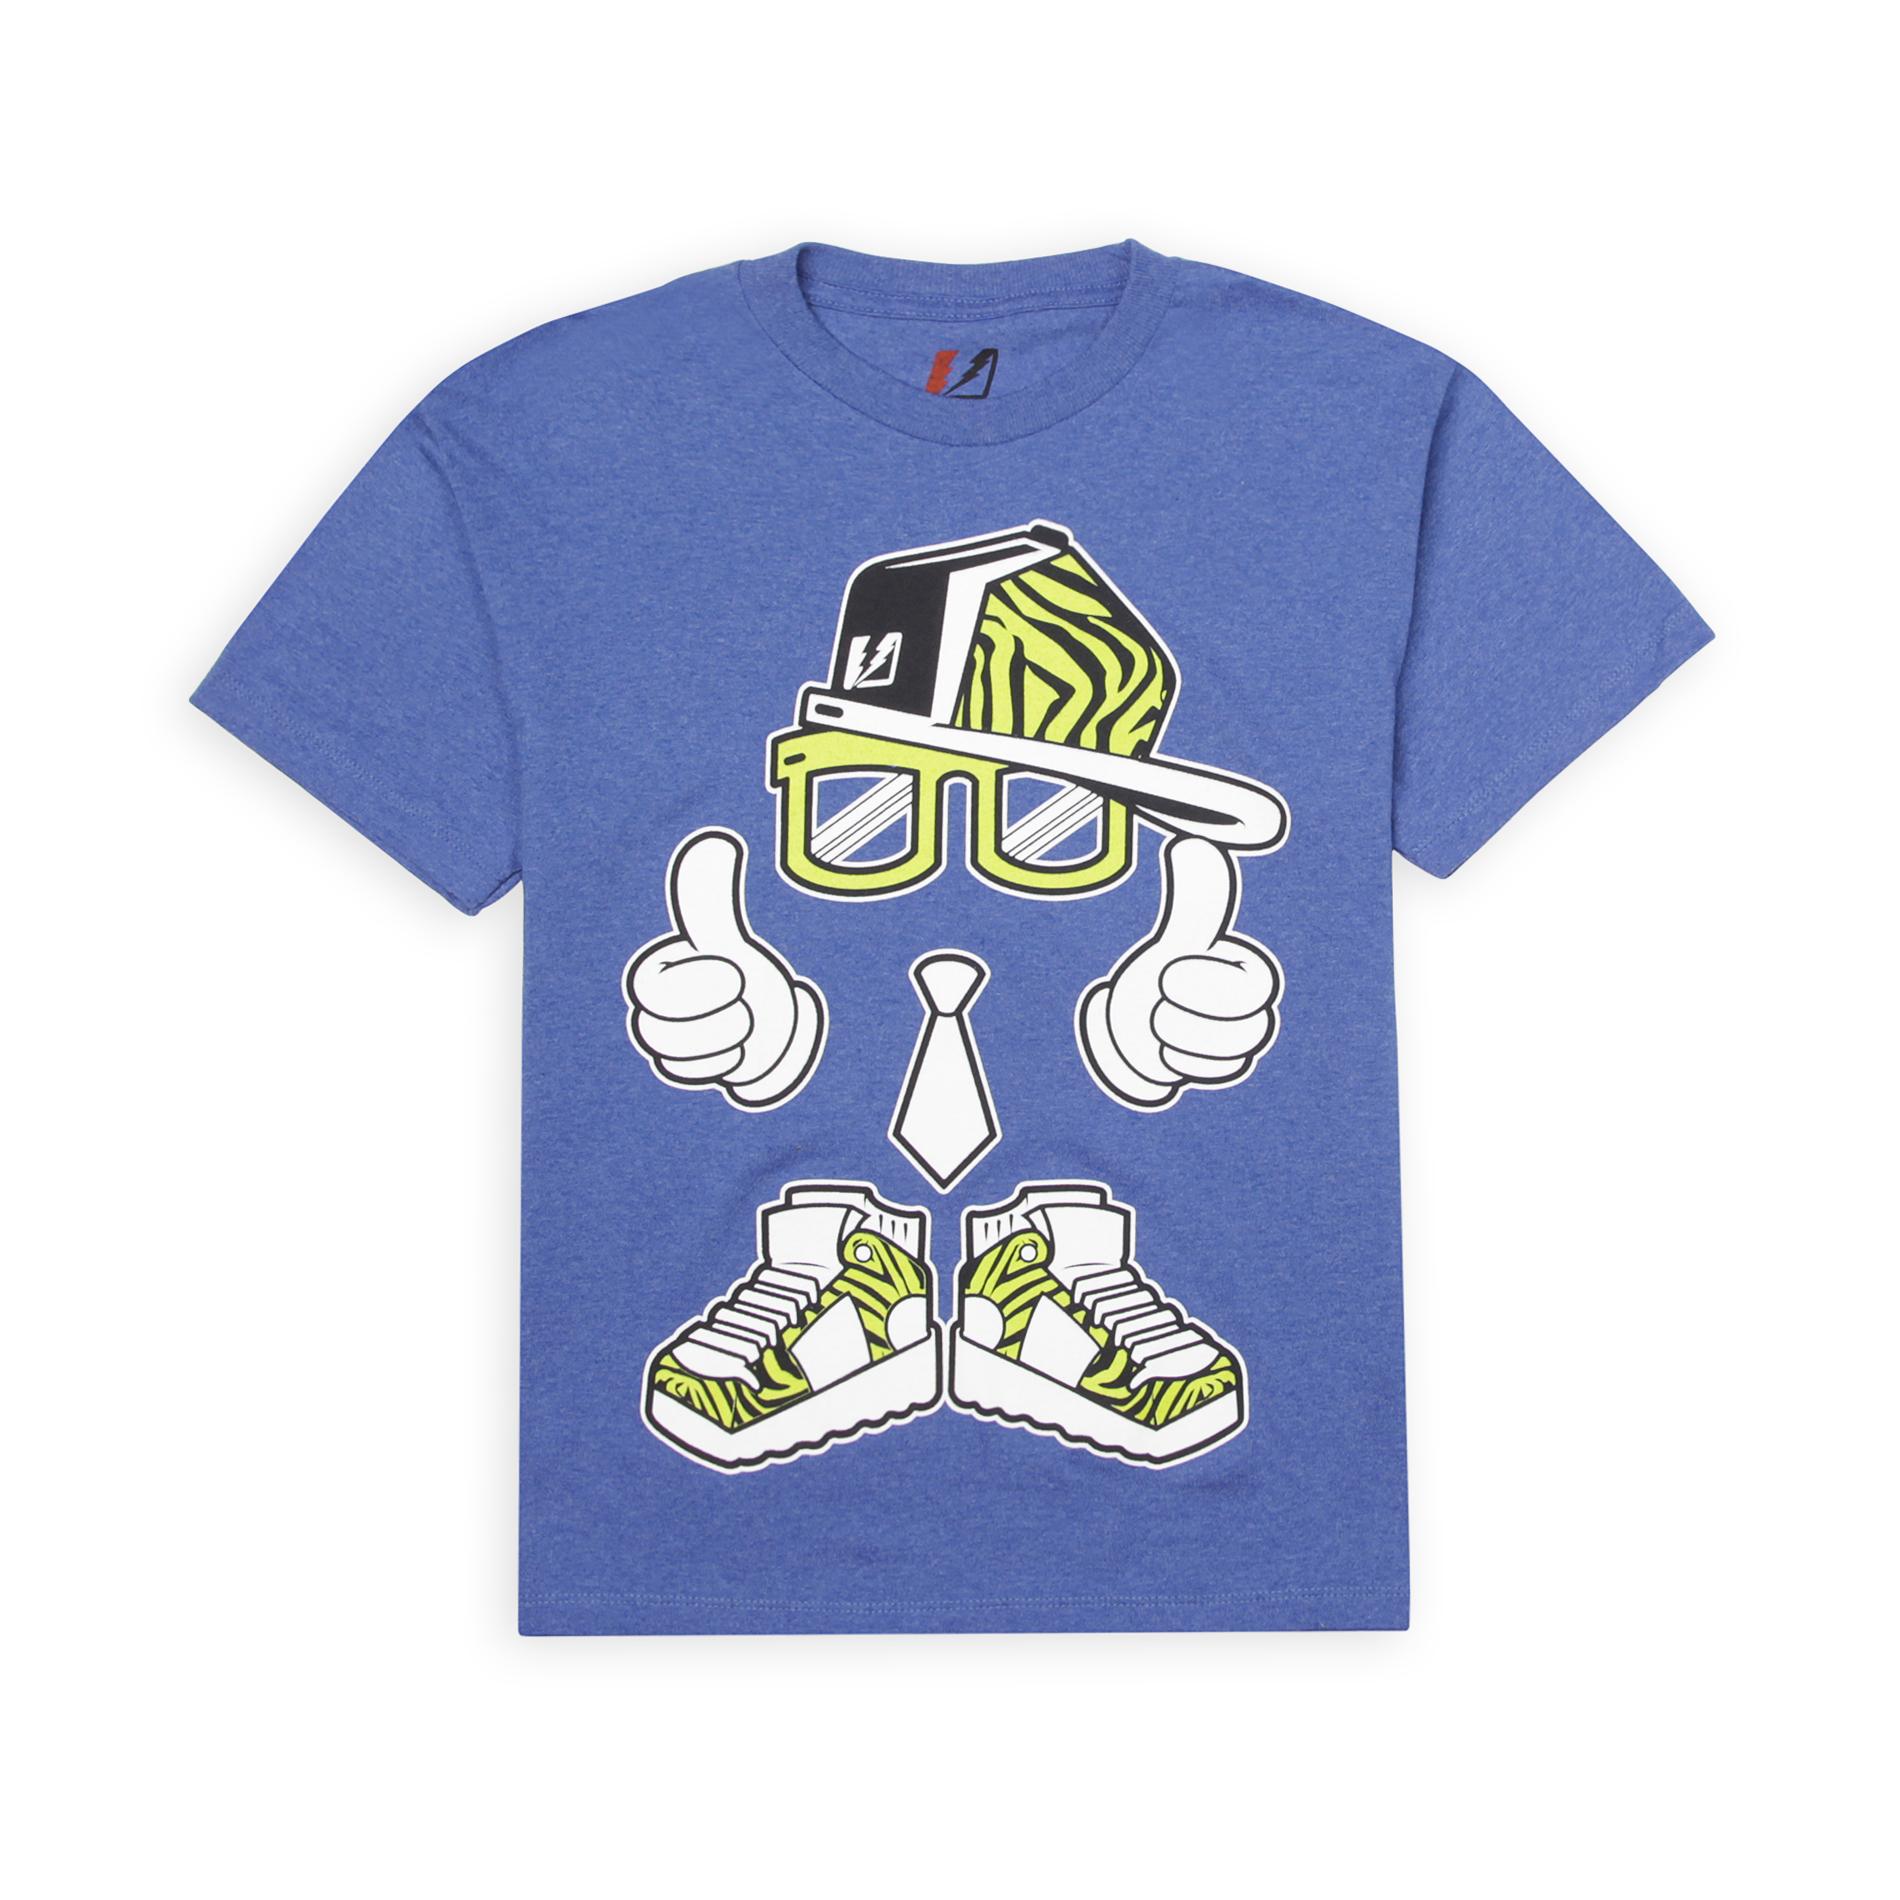 Amplify Boy's Graphic T-Shirt - Thumbs Up